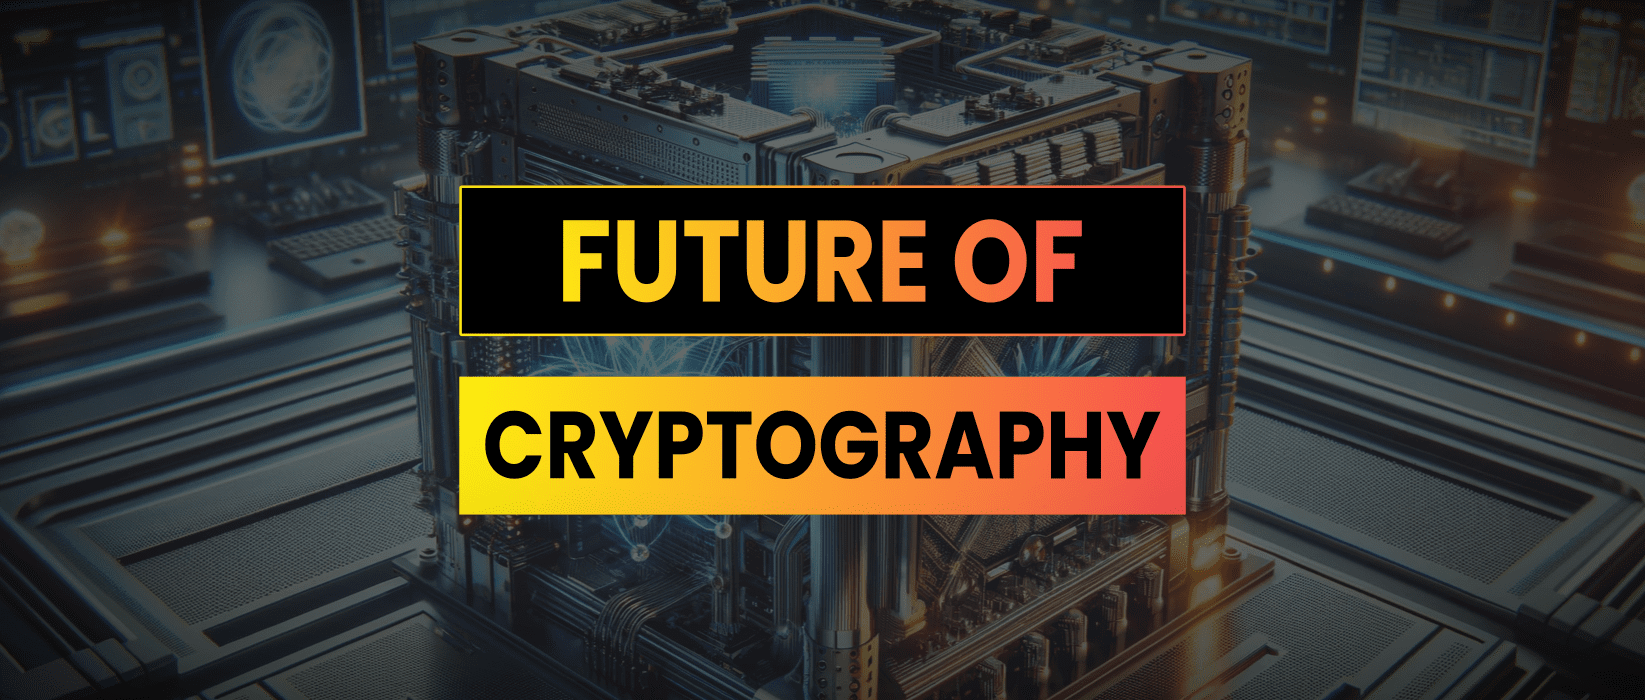 The Future Of Cryptography